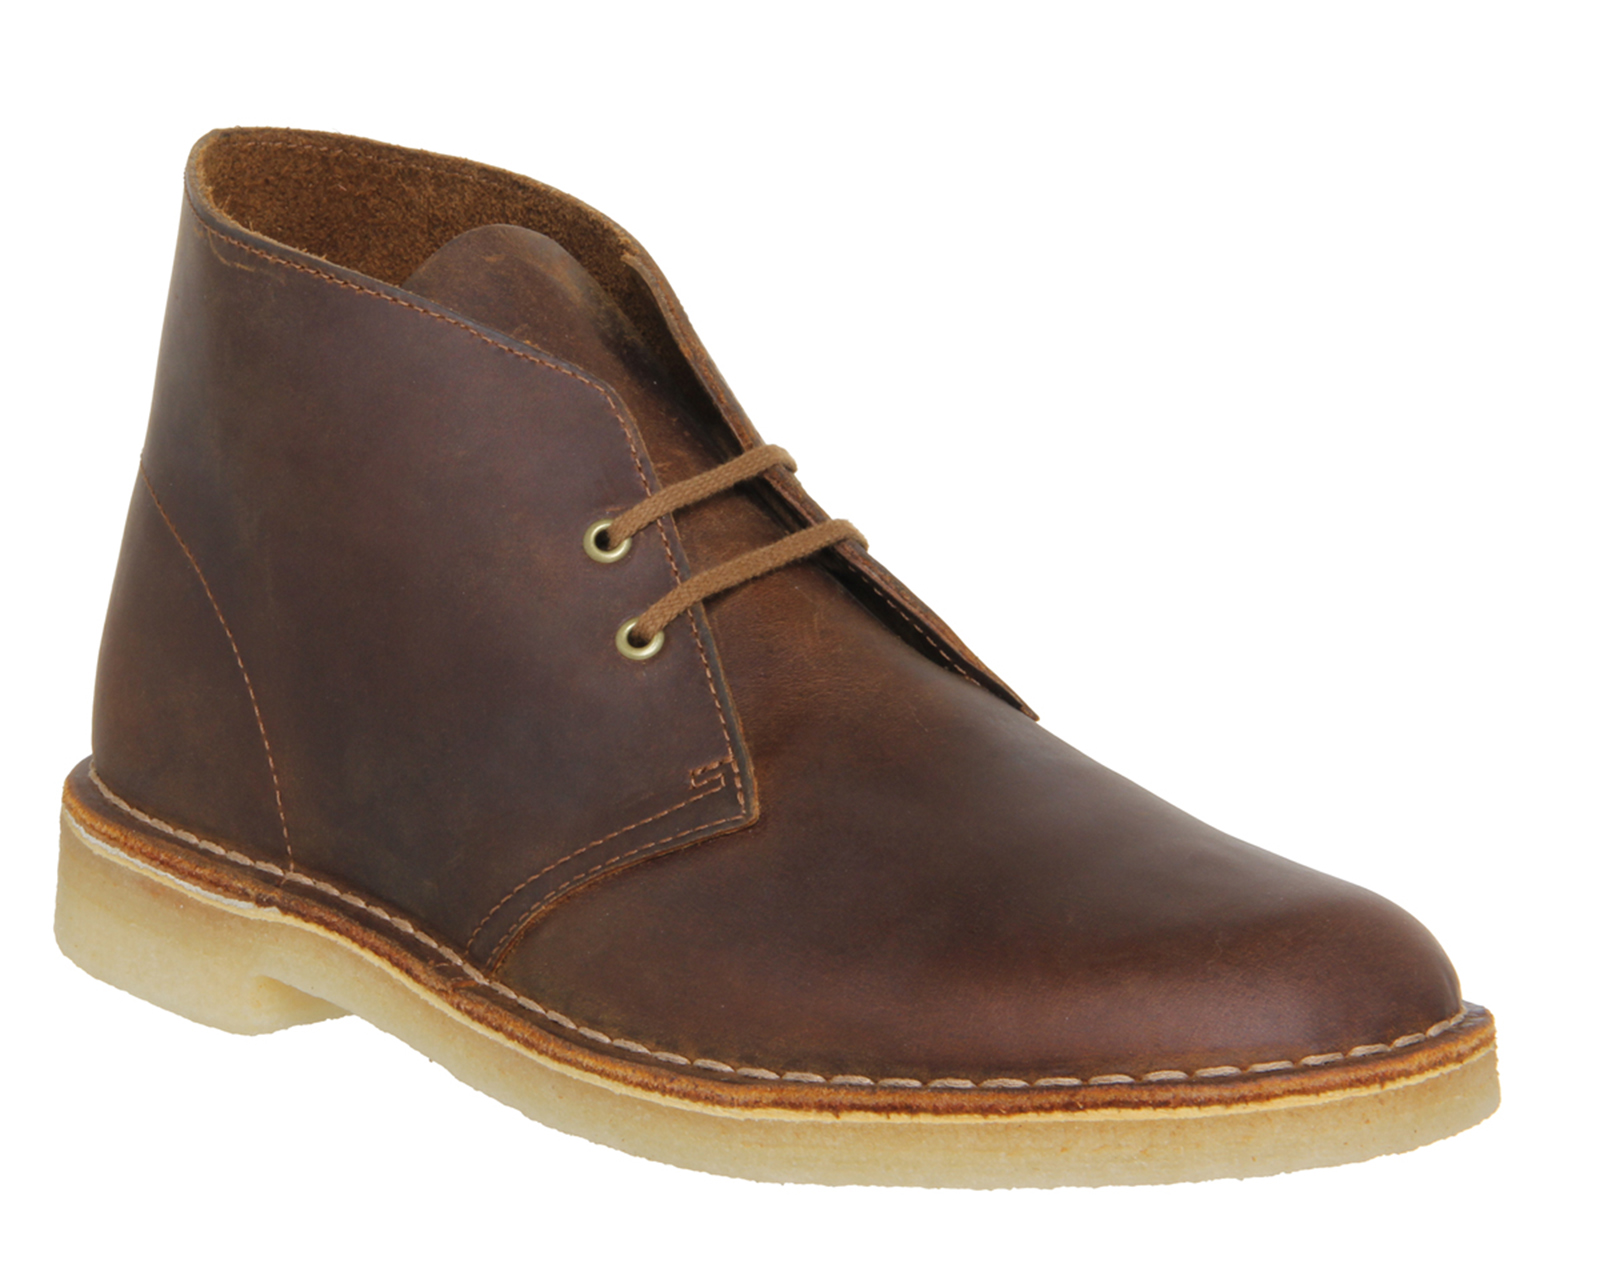 clarks beeswax leather shoes